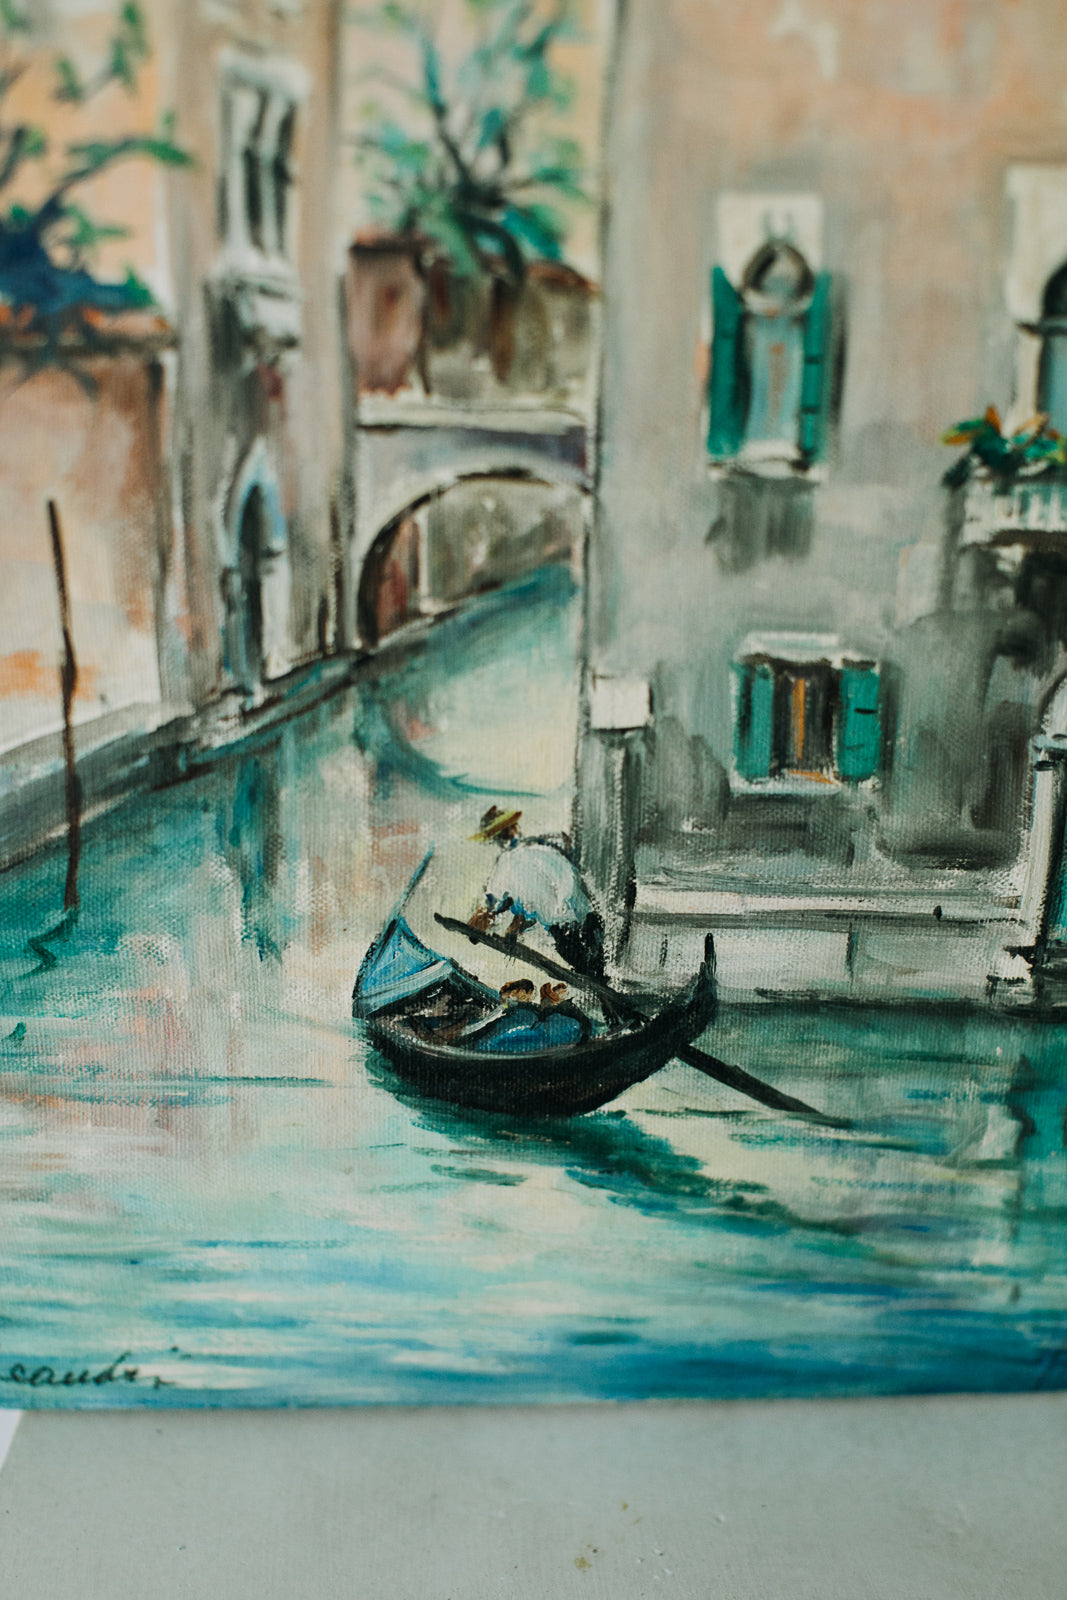 Vintage Venetian Canals Oil Painting